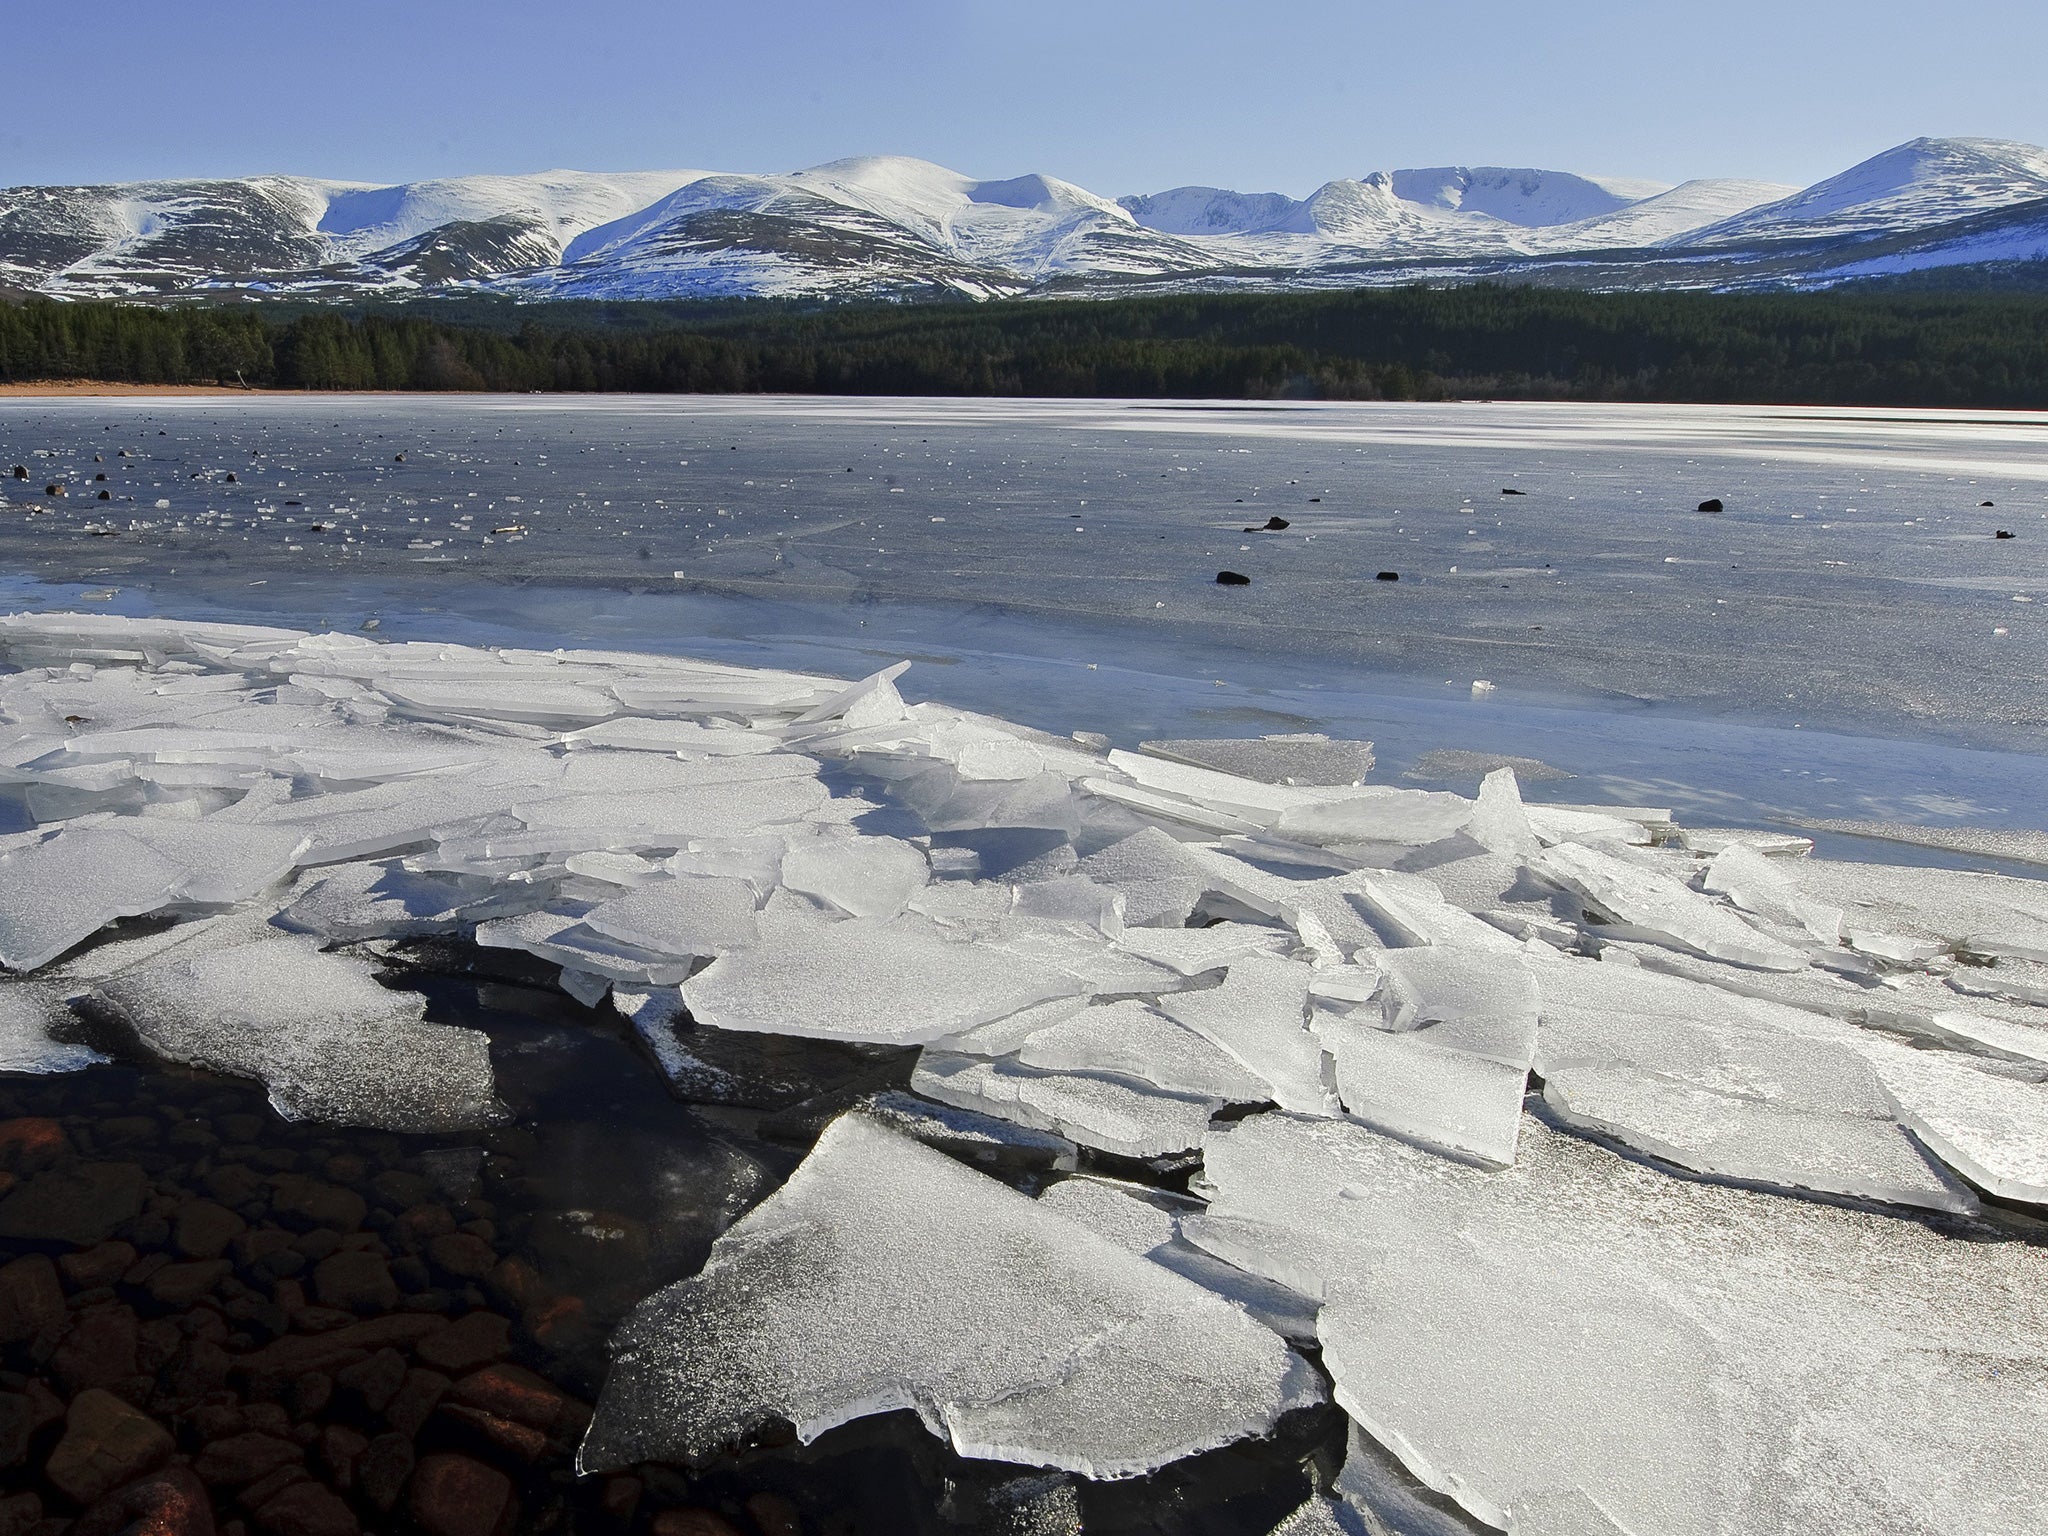 Frozen shore of Loch Morlich and the Cairngorm Mountains in the Glenmore Highlands